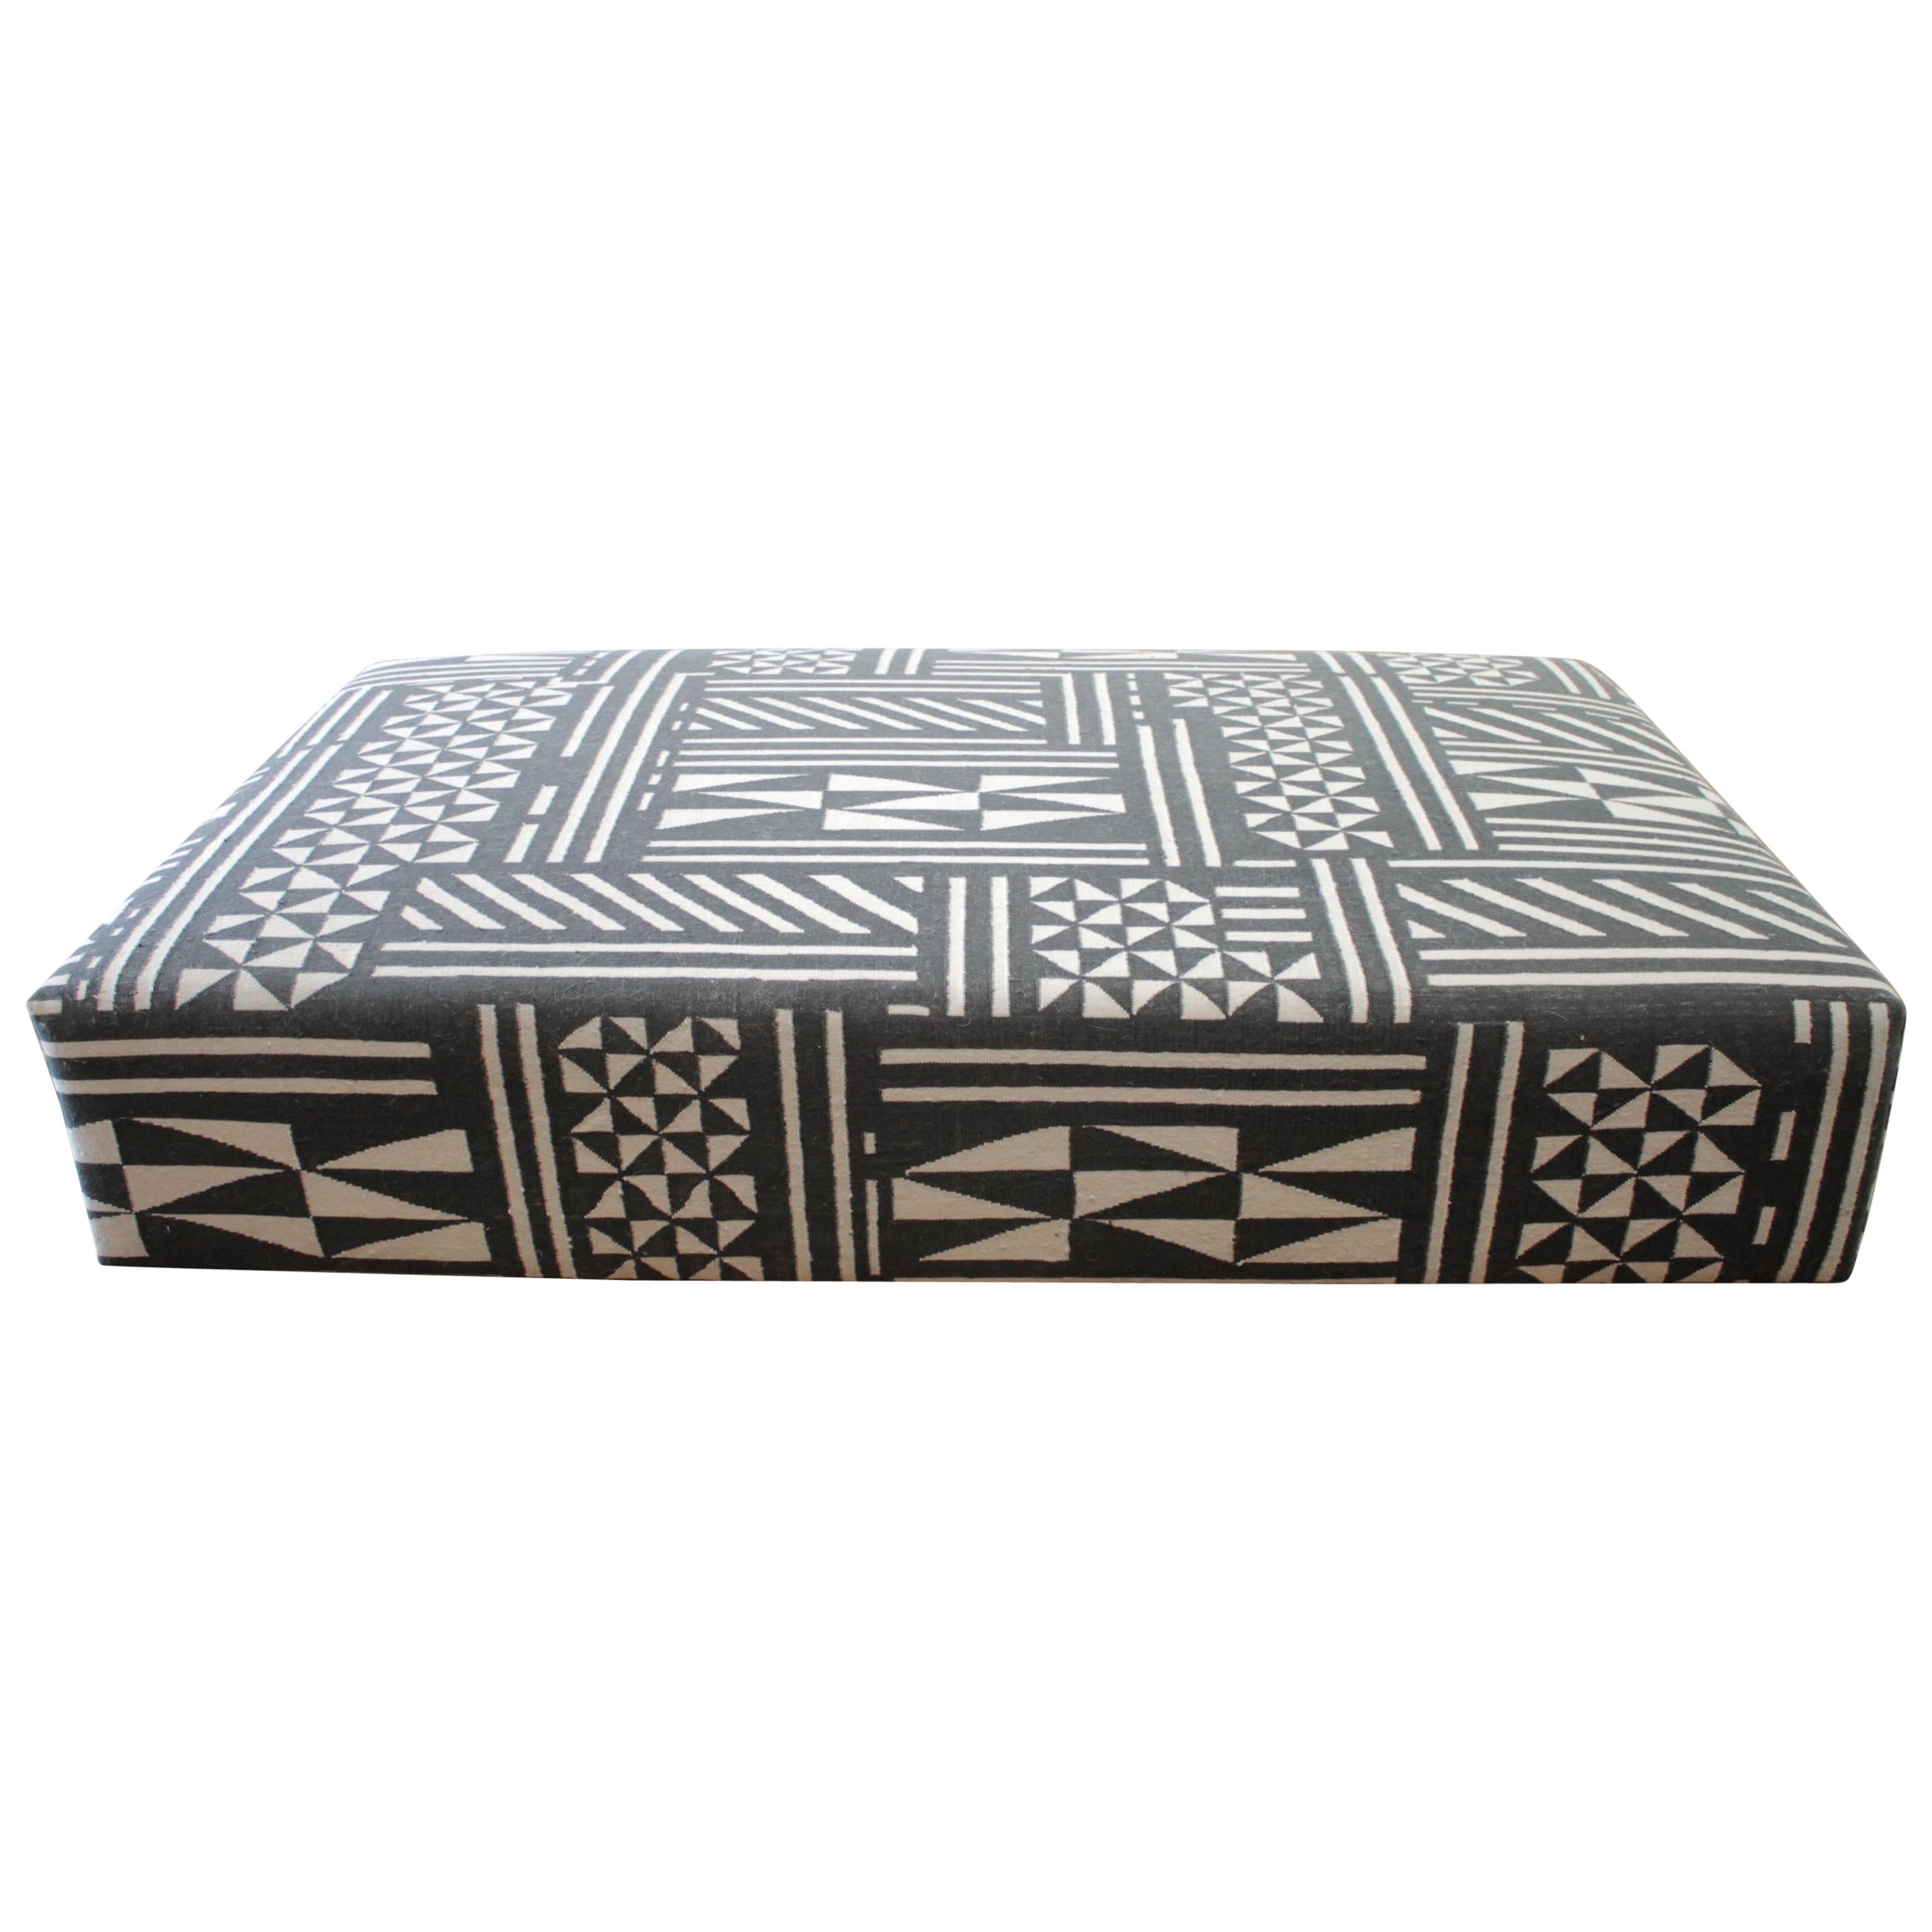 Vintage Wool Rug Cube Style Cocktail Ottoman in Black and Off-White